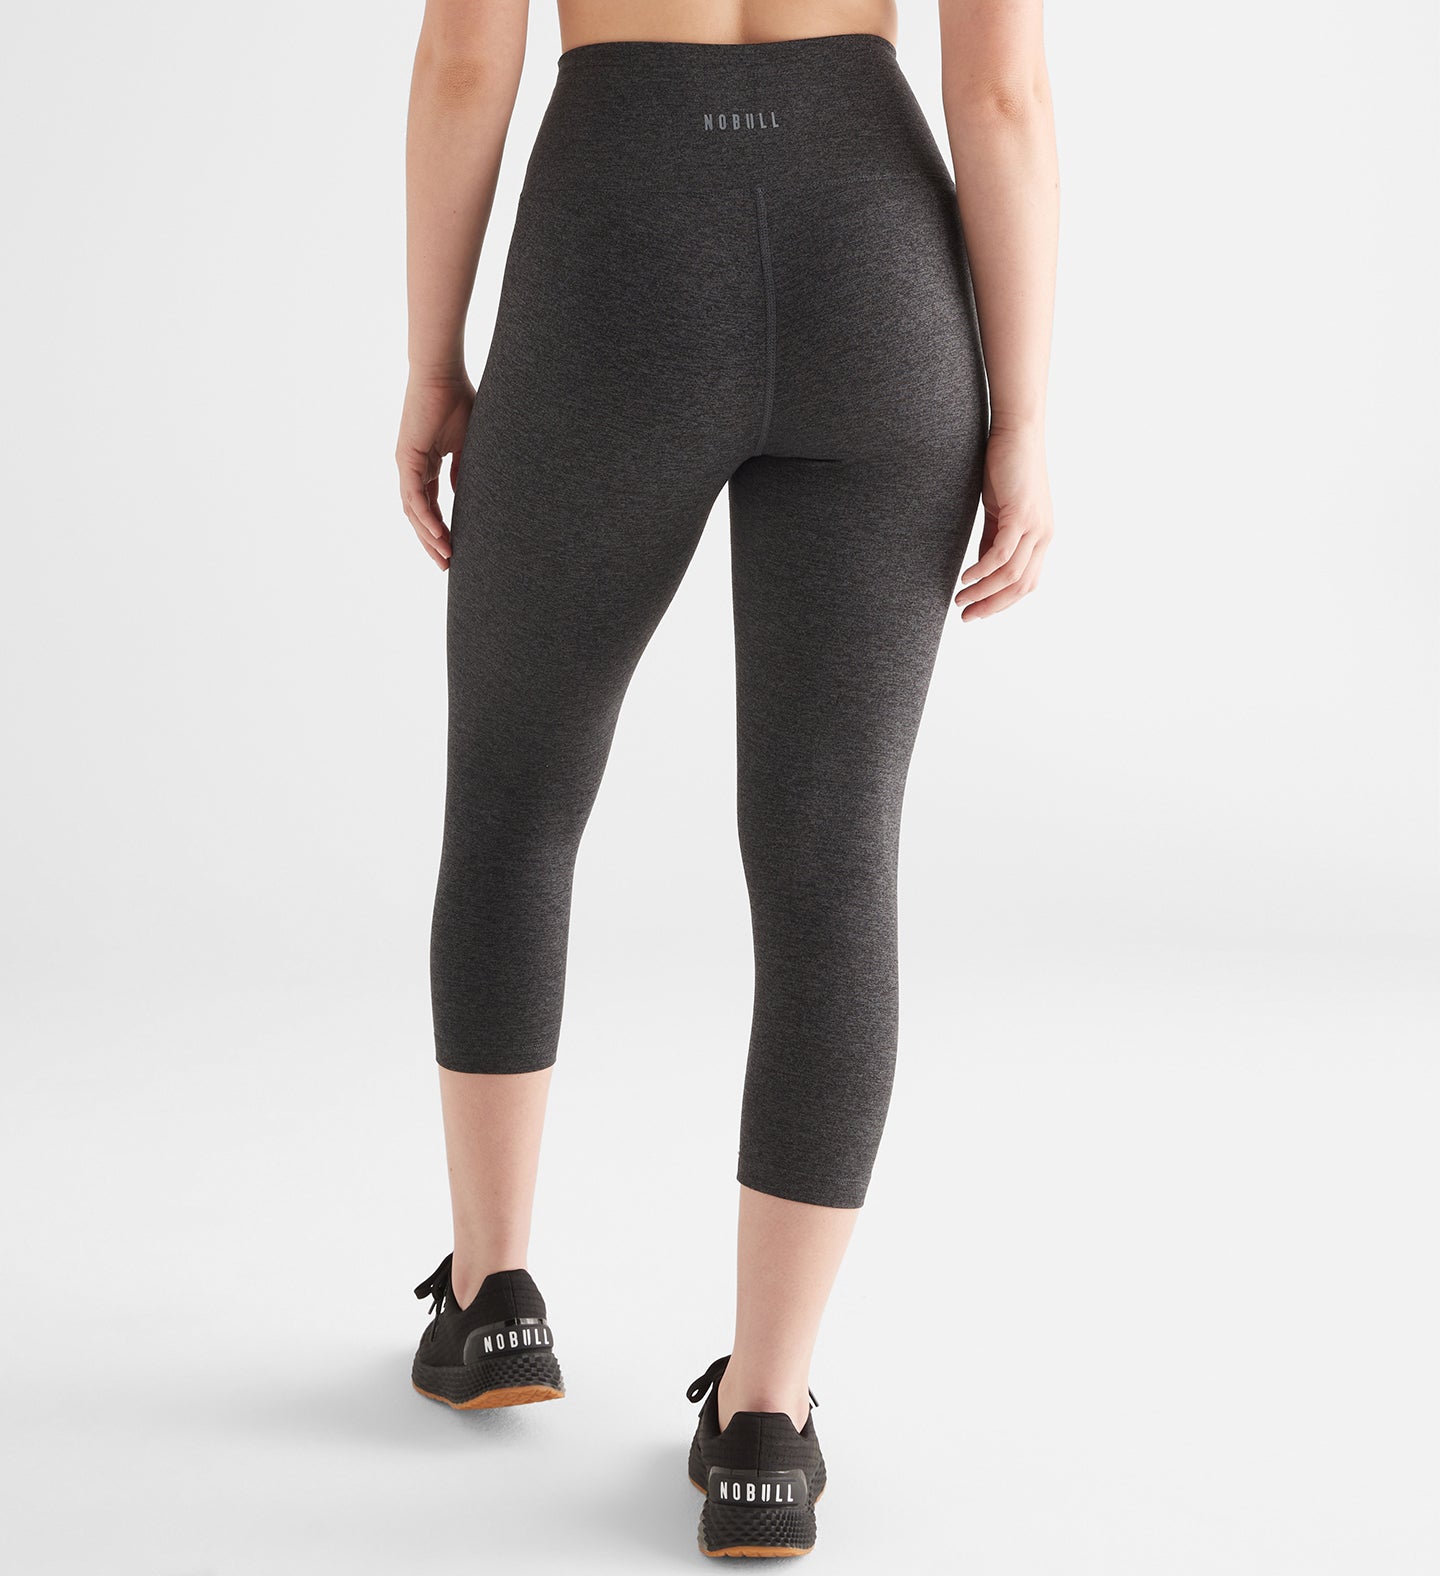 High Waisted Seamless Tight Waistband Without Any Marks, Body